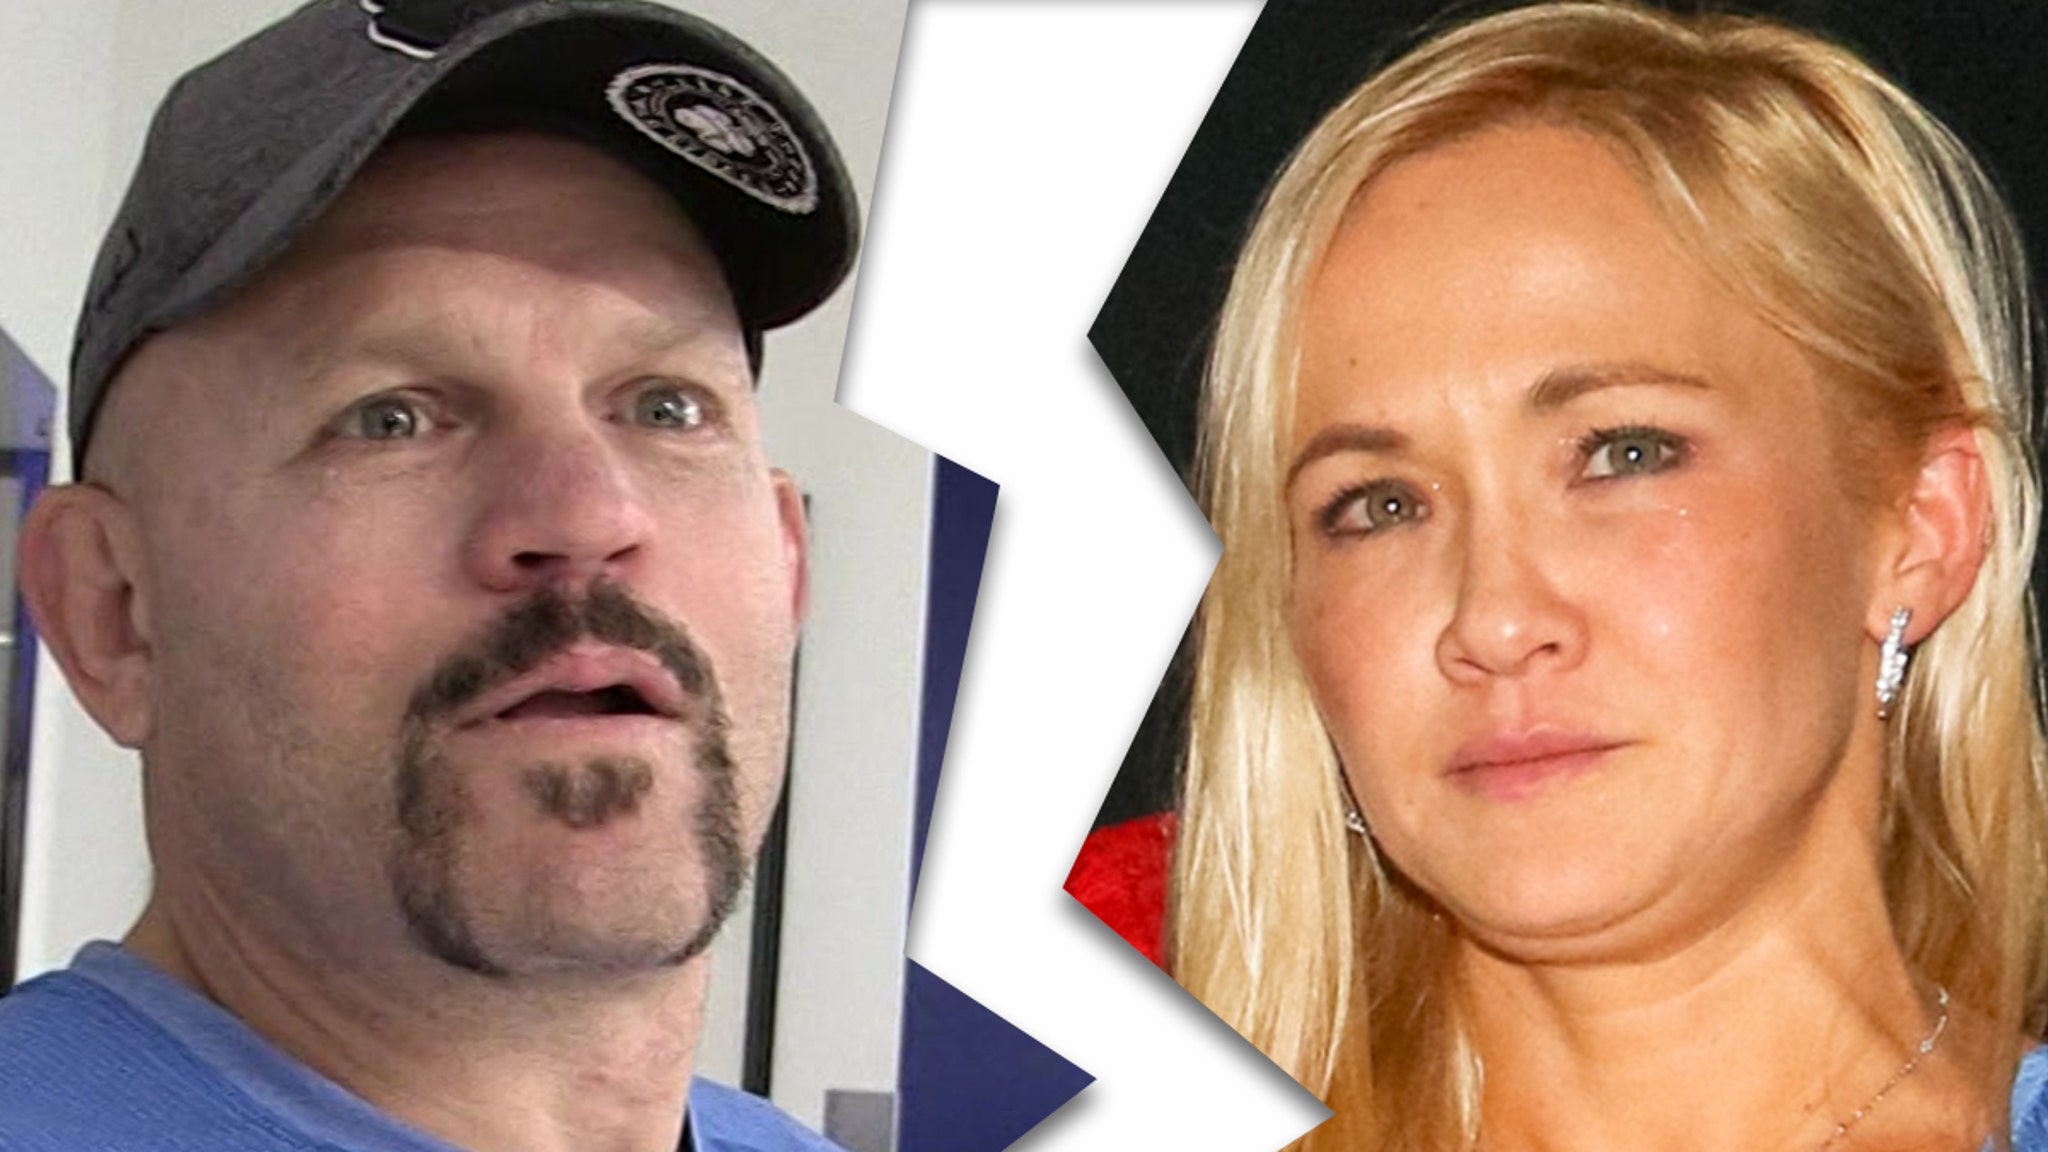 Chuck Liddell Files For Divorce From Wife Days After Dom. Violence Arrest thumbnail